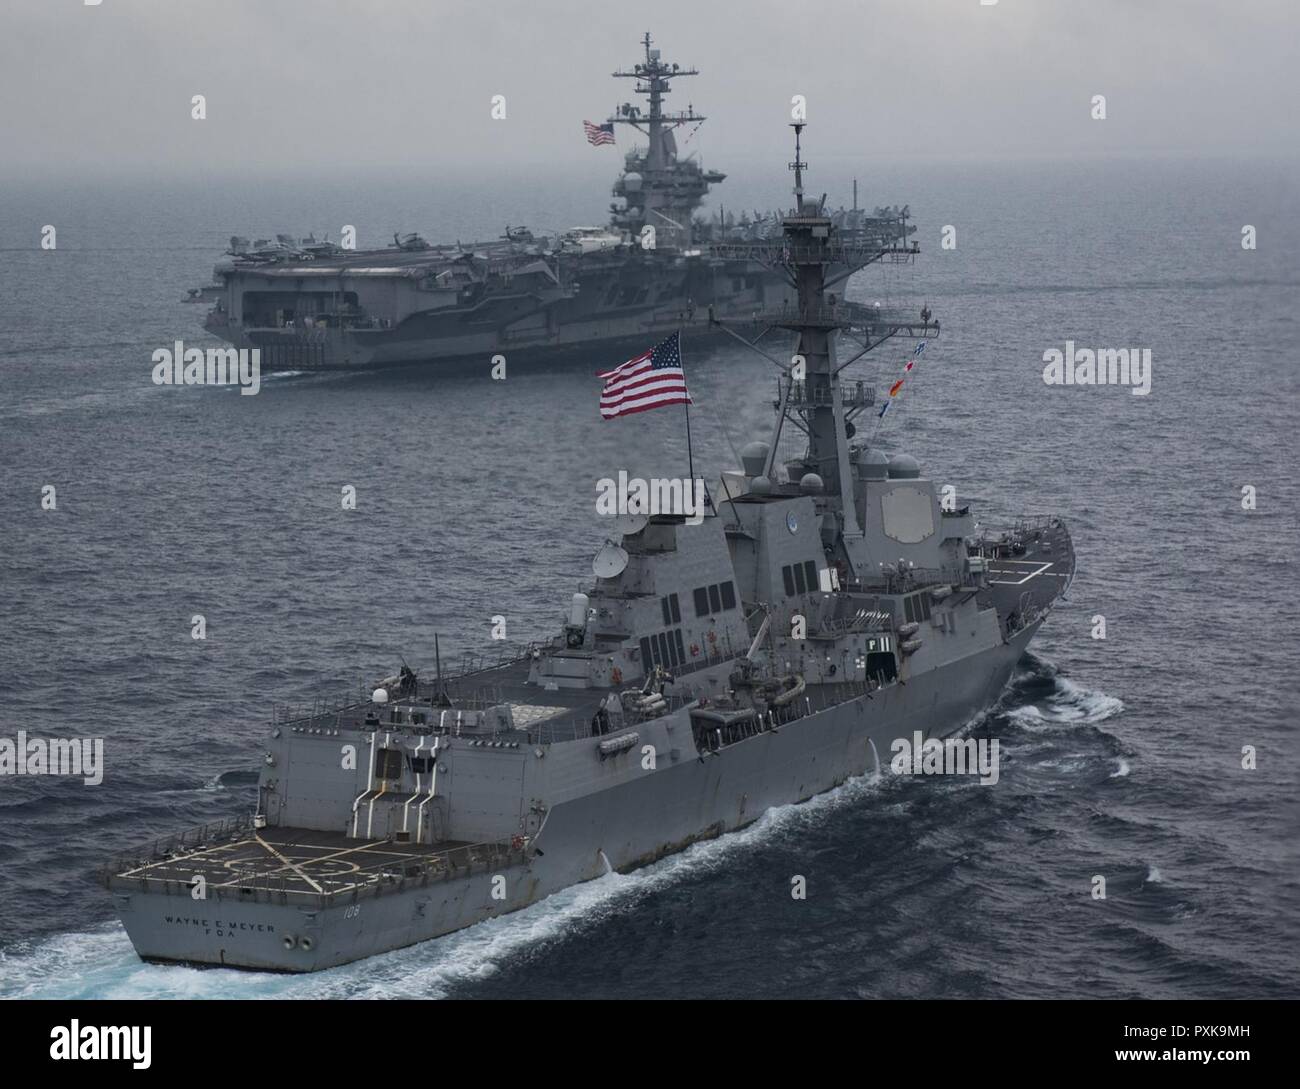 SEA OF JAPAN (June 1, 2017) The Carl Vinson Carrier Strike Group, including the aircraft carrier USS Carl Vinson (CVN 70), Carrier Air Wing (CVW) 2, the guided-missile cruiser USS Lake Champlain (CG 57) and the guided-missile destroyers USS Wayne E. Meyer (DDG 108) and USS Michael Murphy (DDG 112), operates with the Ronald Reagan Carrier Strike Group, including USS Ronald Reagan (CVN 76), CVW-5, USS Shiloh (CG 67), USS Barry (DDG 52), USS McCampbell (DDG 85), USS Fitzgerald (DDG 62) and USS Mustin (DDG 89), and the Japan Maritime Self-Defense Force ships (JS) Hyuga (DDH 181) and JS Ashigara (D Stock Photo